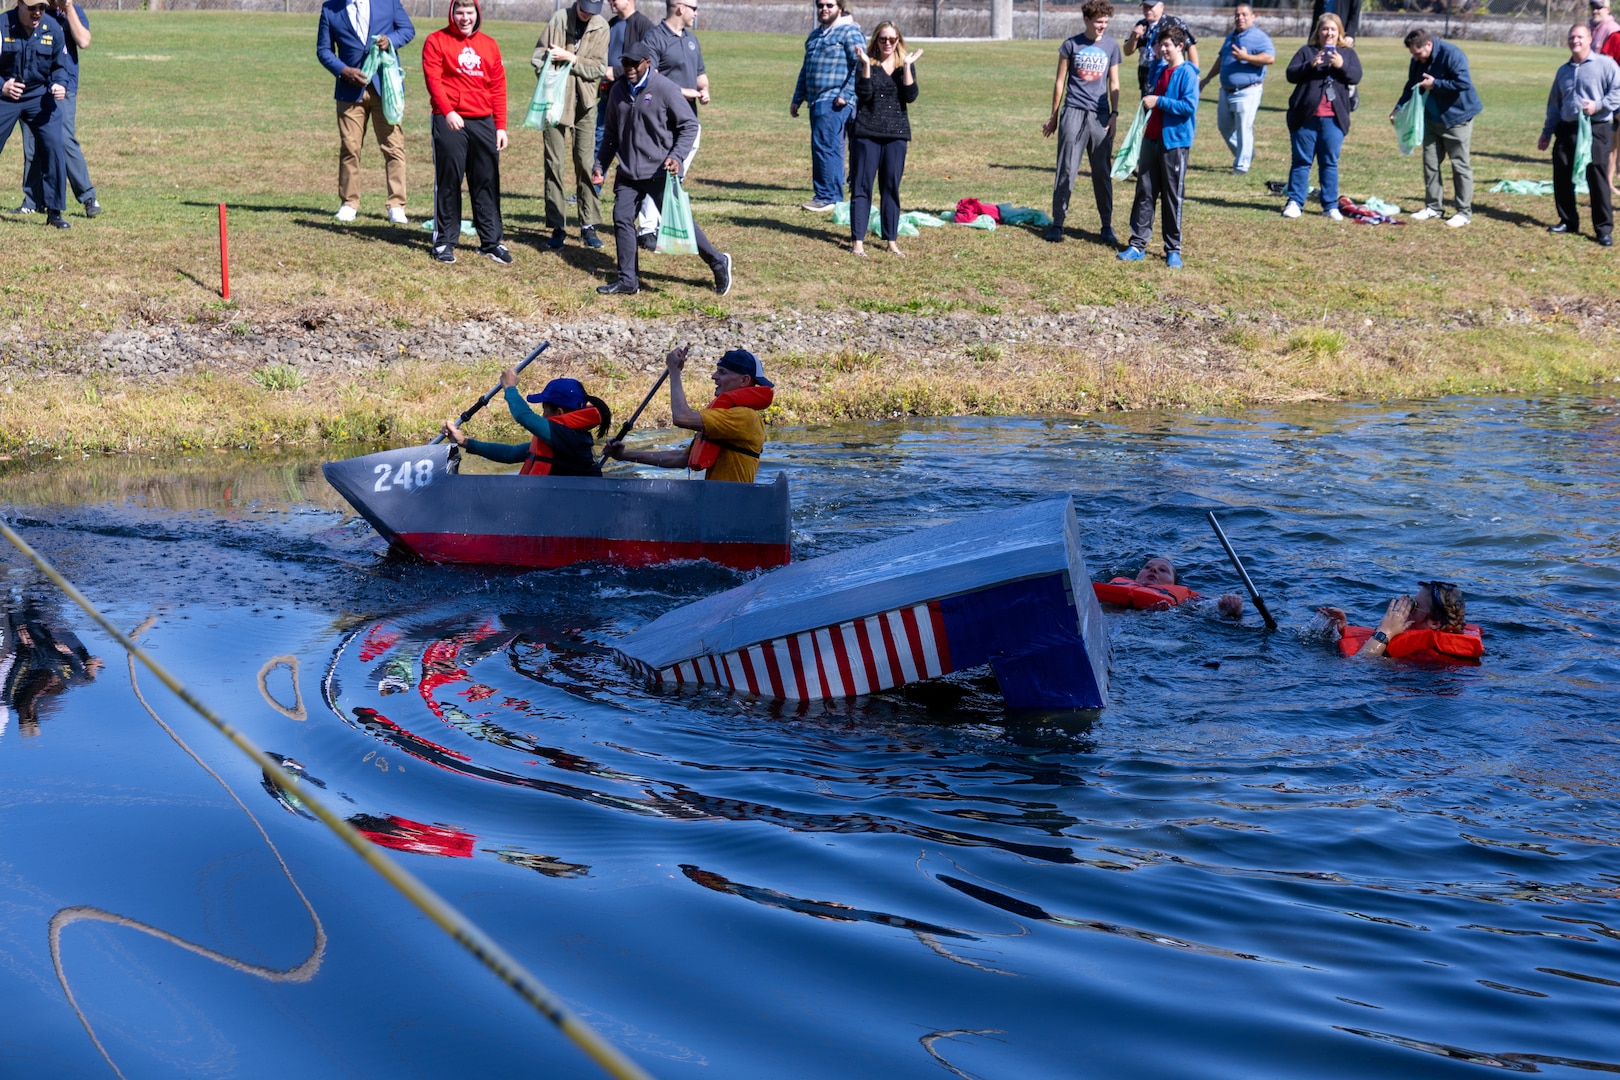 Two boats made of cardboard are racing through a pond. One boat with two rowers, a man and a woman wearing life preservers and is shaped like the hull of a ship with a Navy number the front glides past the other boat which is square and has just capsized leaving its two paddlers floating in the water with their life jackets on.